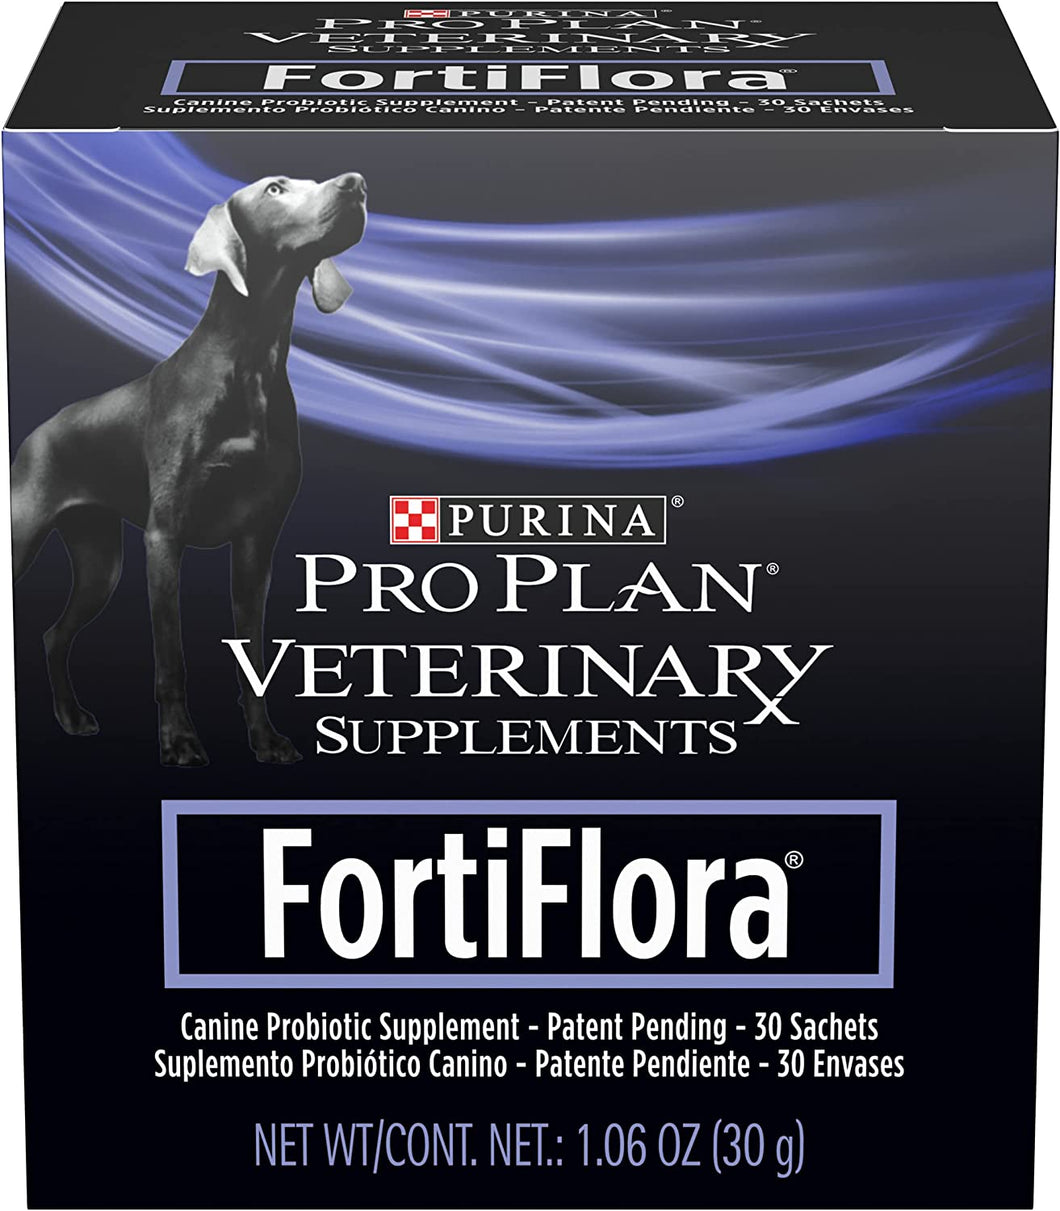 FortiFlora Probiotics for Dogs, Pro Plan Veterinary Supplements Powder or Chewable Probiotic Dog Supplement